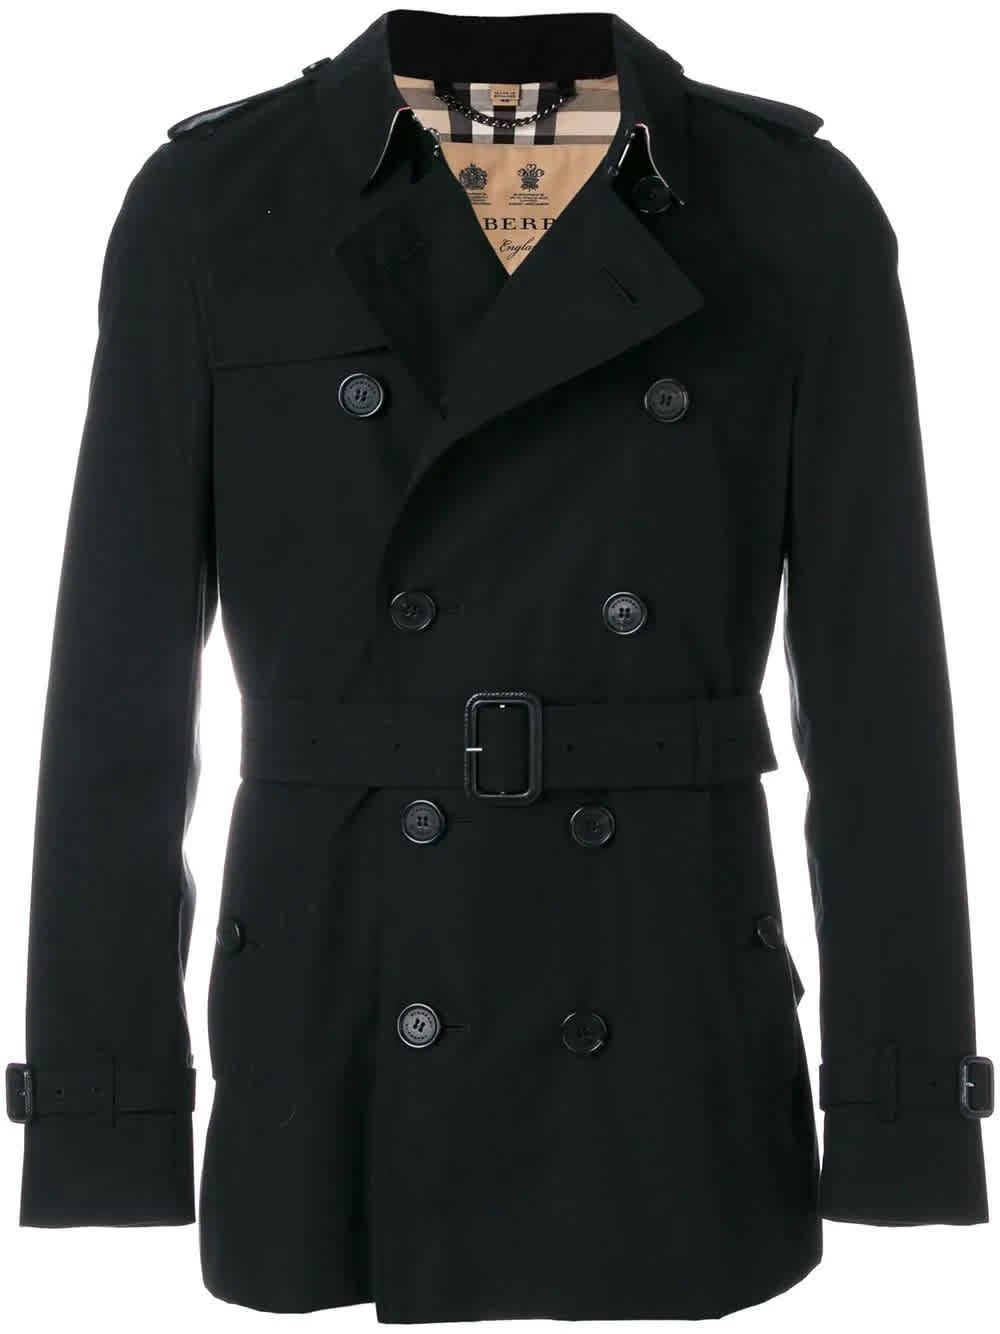 burberry trench coat size